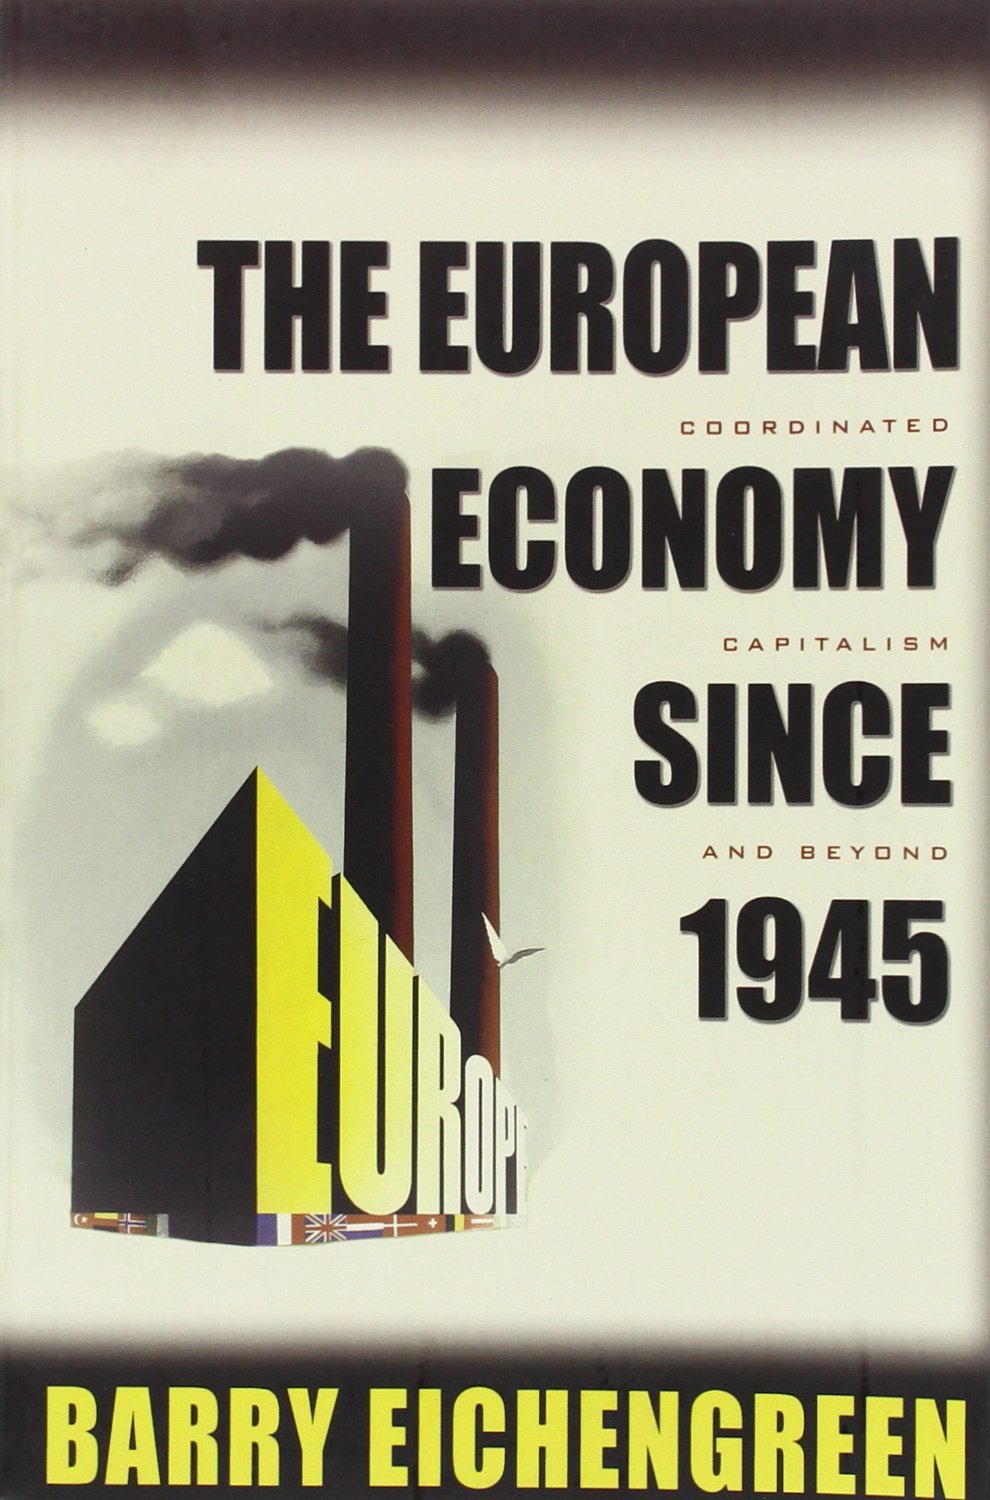 The European Economy since 1945: Coordinated Capitalism and Beyond (The Princeton Economic History of the Western World, 23)